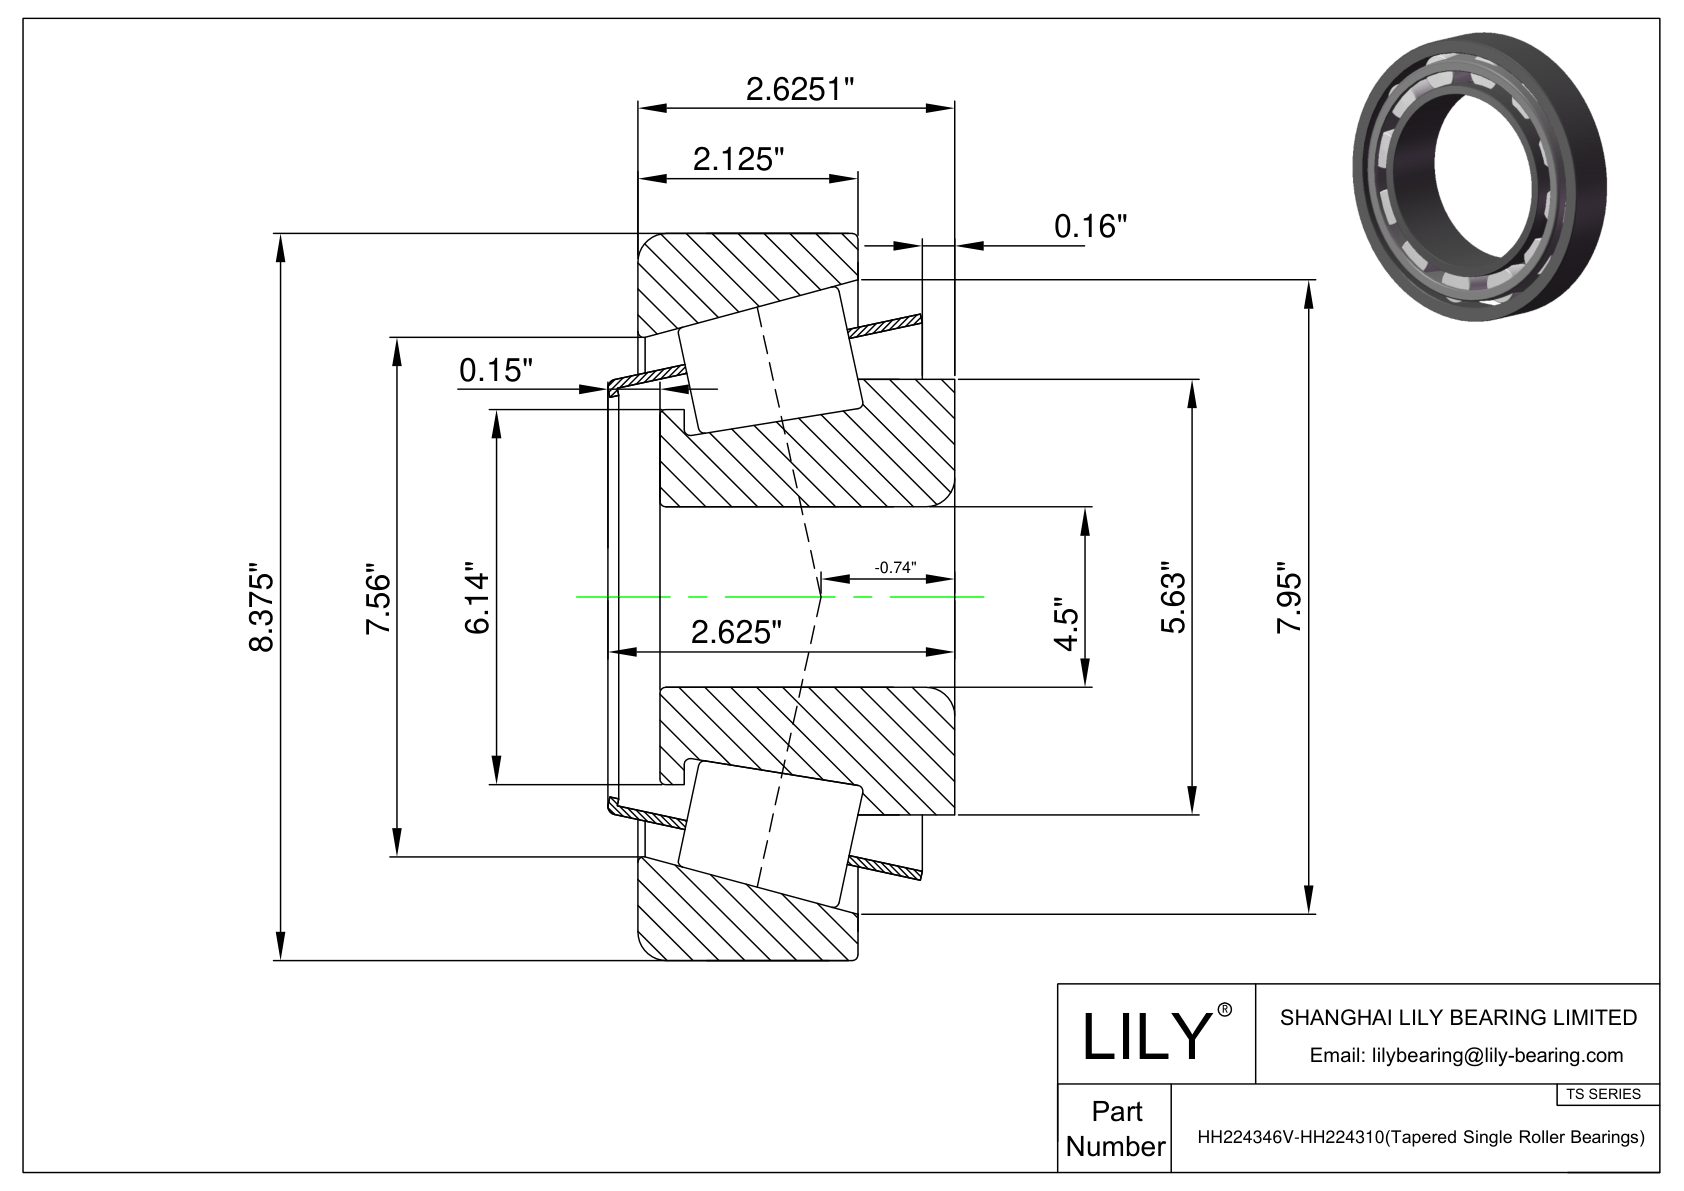 HH224346V-HH224310 TS (Tapered Single Roller Bearings) (Imperial) cad drawing